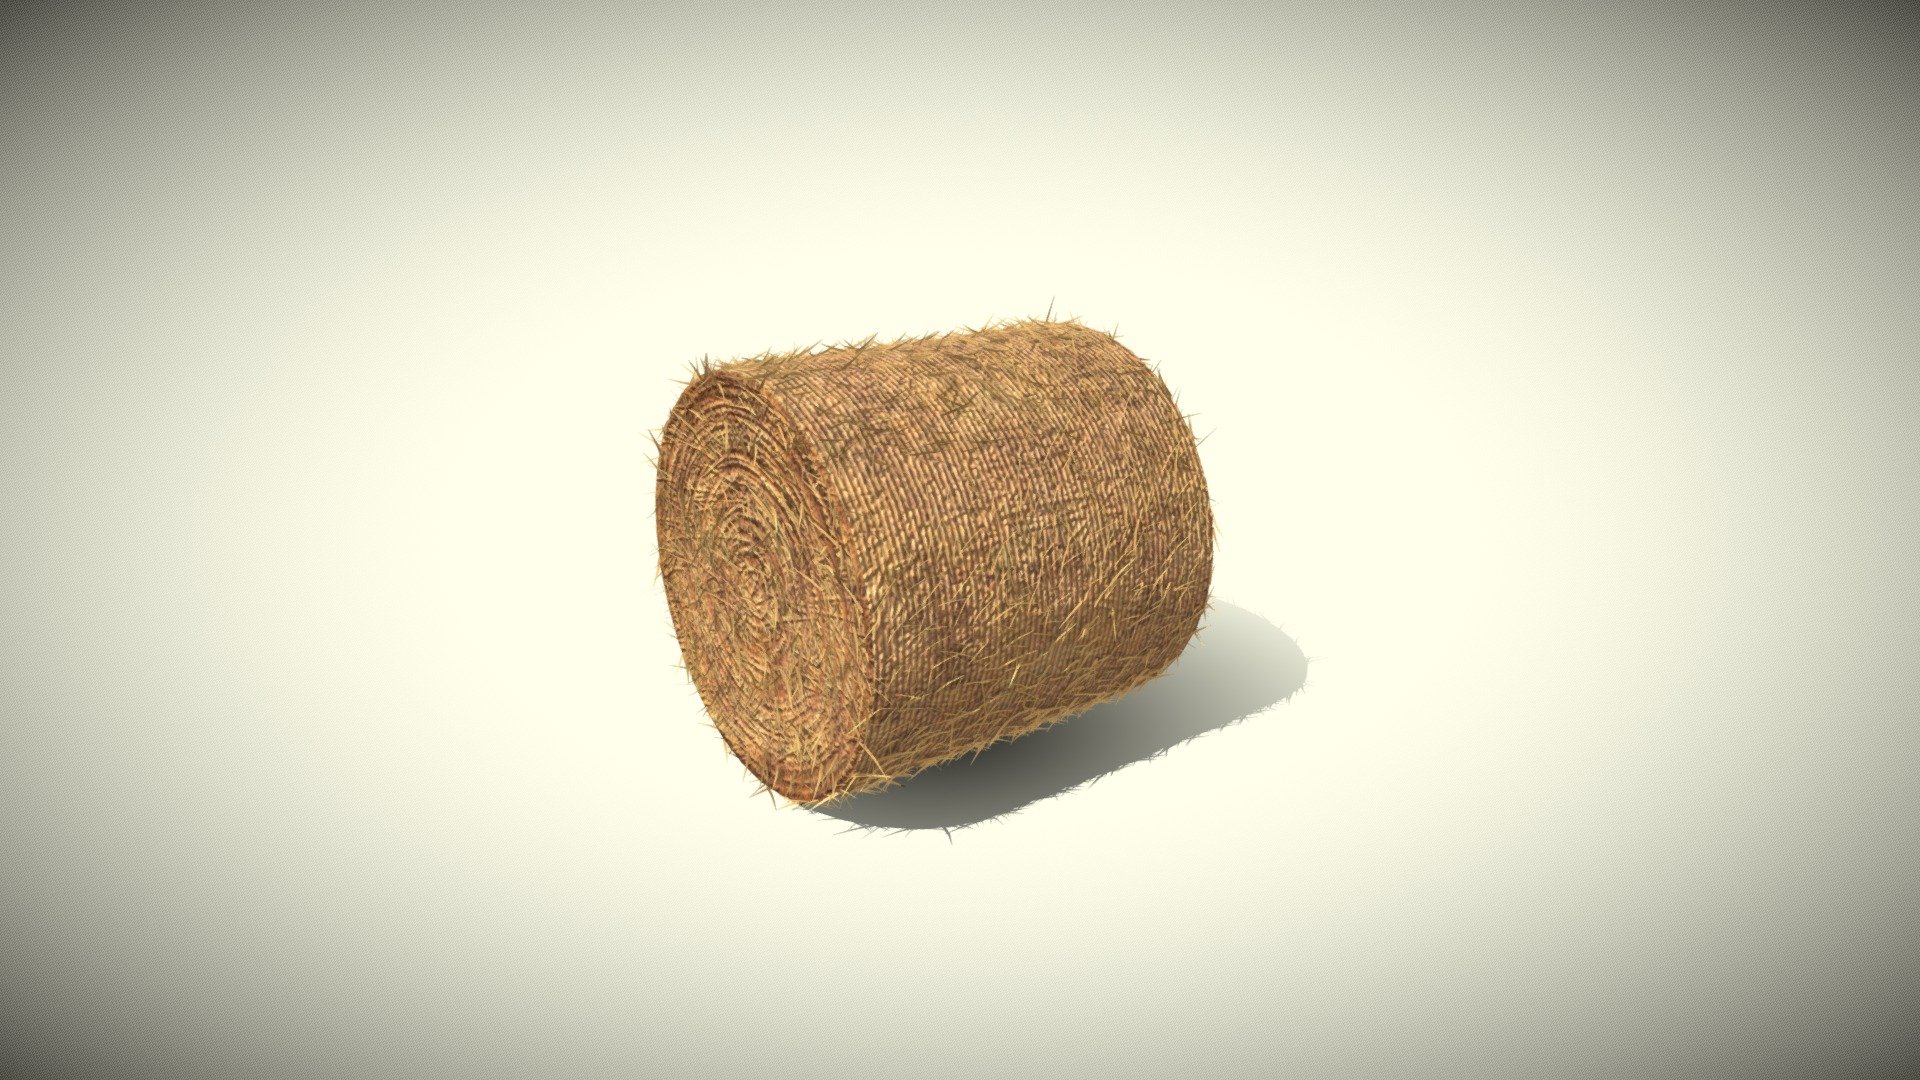 Hay Bale Round 3D Model is completely ready to be used in your games animations films designs etc.  

All textures and materials are included and mapped in every format. The model is completely ready for use visualization in any 3d software and engine.  

Technical details:  


File formats included in the package are: FBX, OBJ, GLB, ABC, DAE, PLY, STL, BLEND, gLTF (generated), USDZ (generated)  
Native software file format: BLEND  
Polygons: 10,384
Vertices: 30,386
Textures: Color, Metallic, Roughness, Normal, AO.  
All textures are 1k resolution.
 - Hay Bale Round 3D Model - Buy Royalty Free 3D model by 3DDisco 3d model